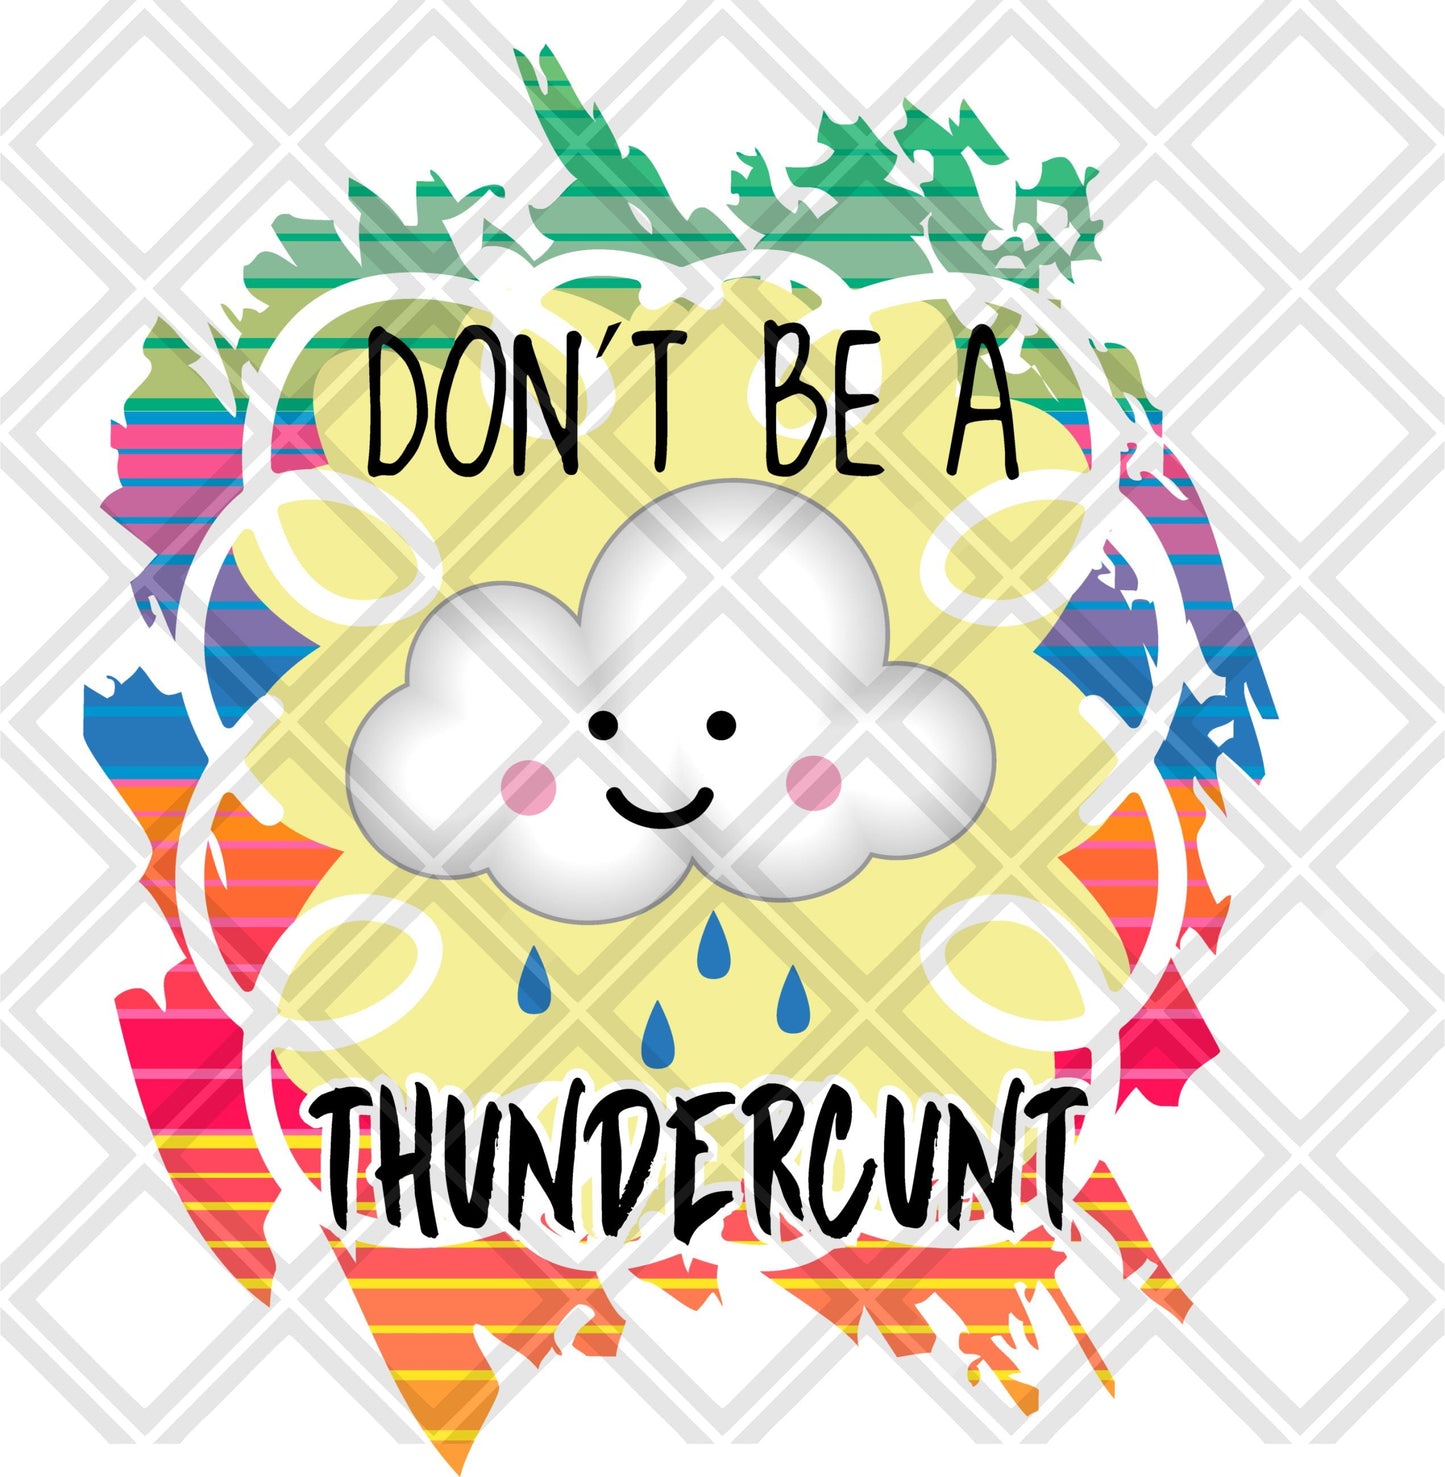 Don't be a Thundercunt DTF TRANSFERPRINT TO ORDER